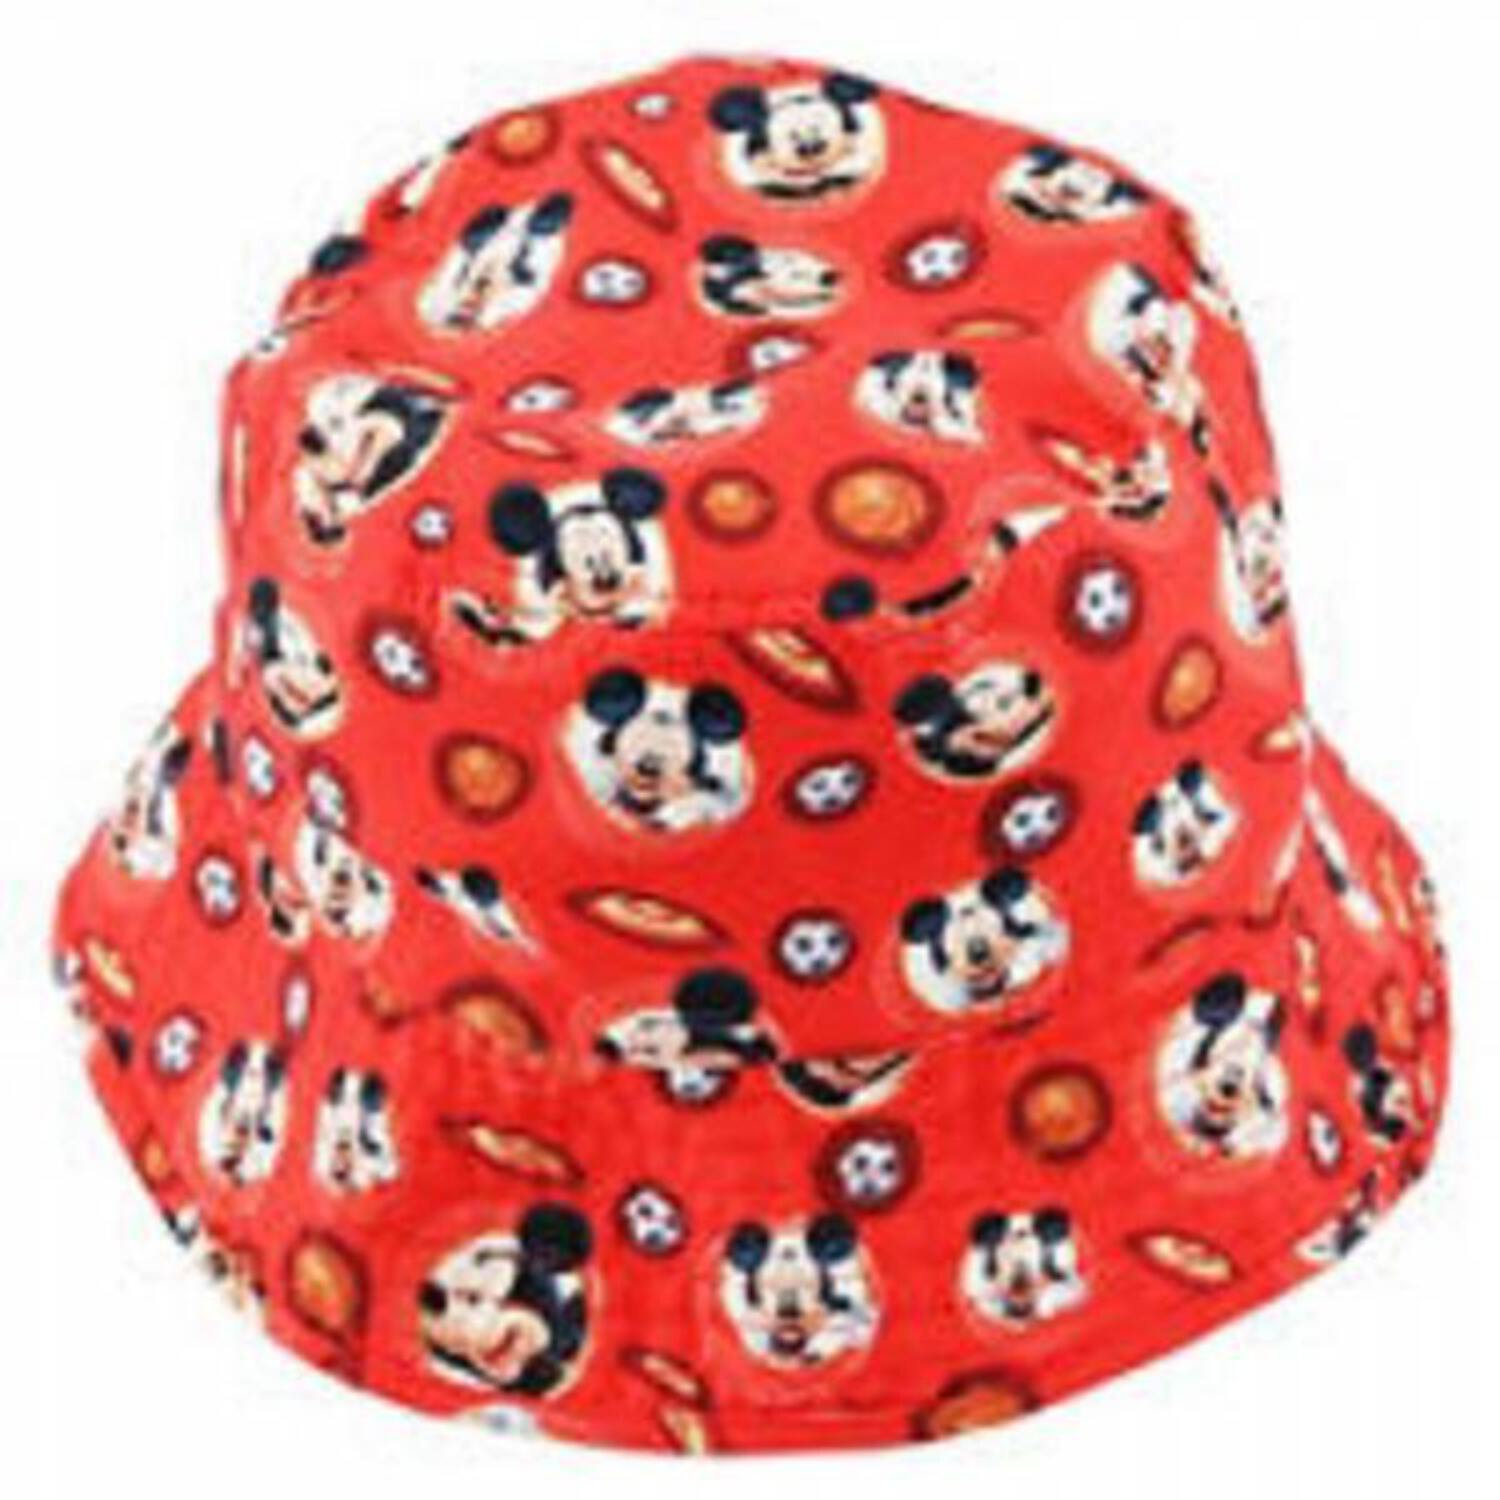 Youth Bucket Hat - image 1 of 1